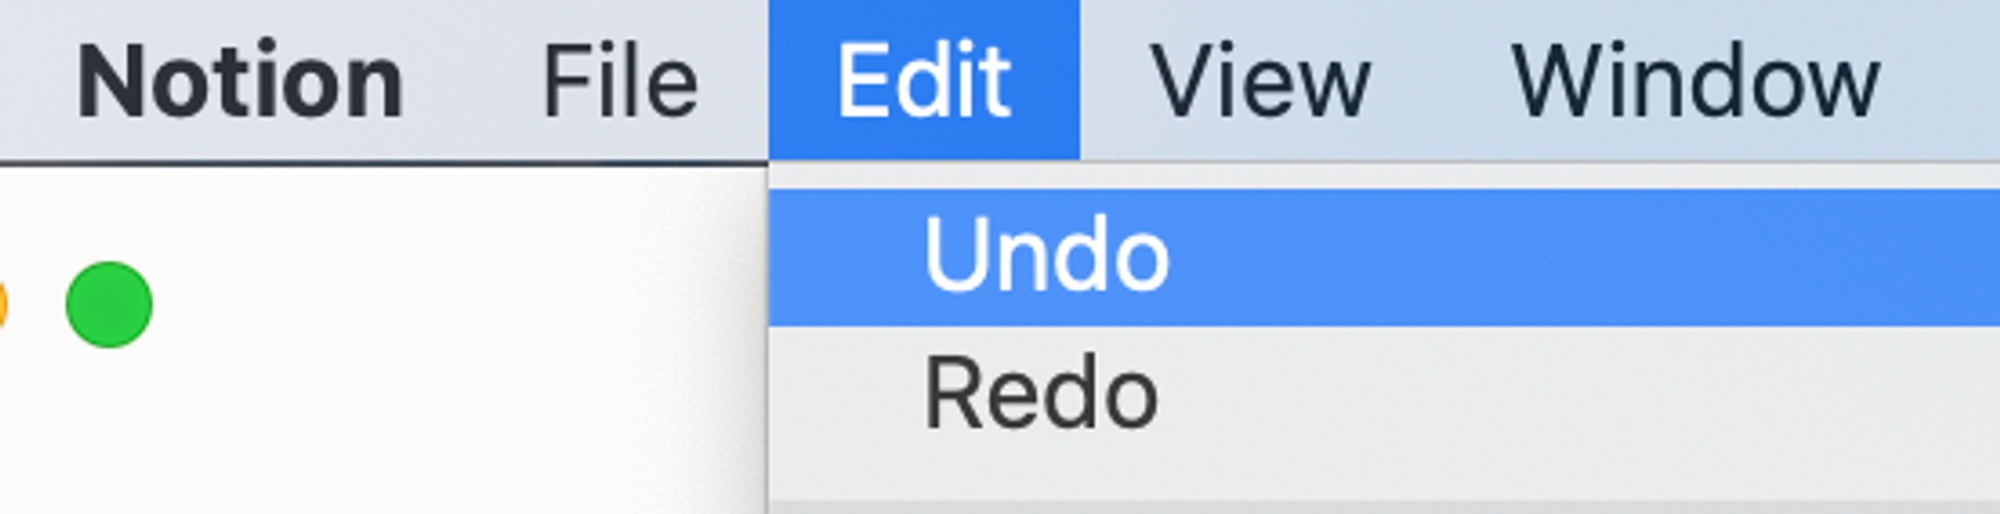 How to quickly undo in Notion